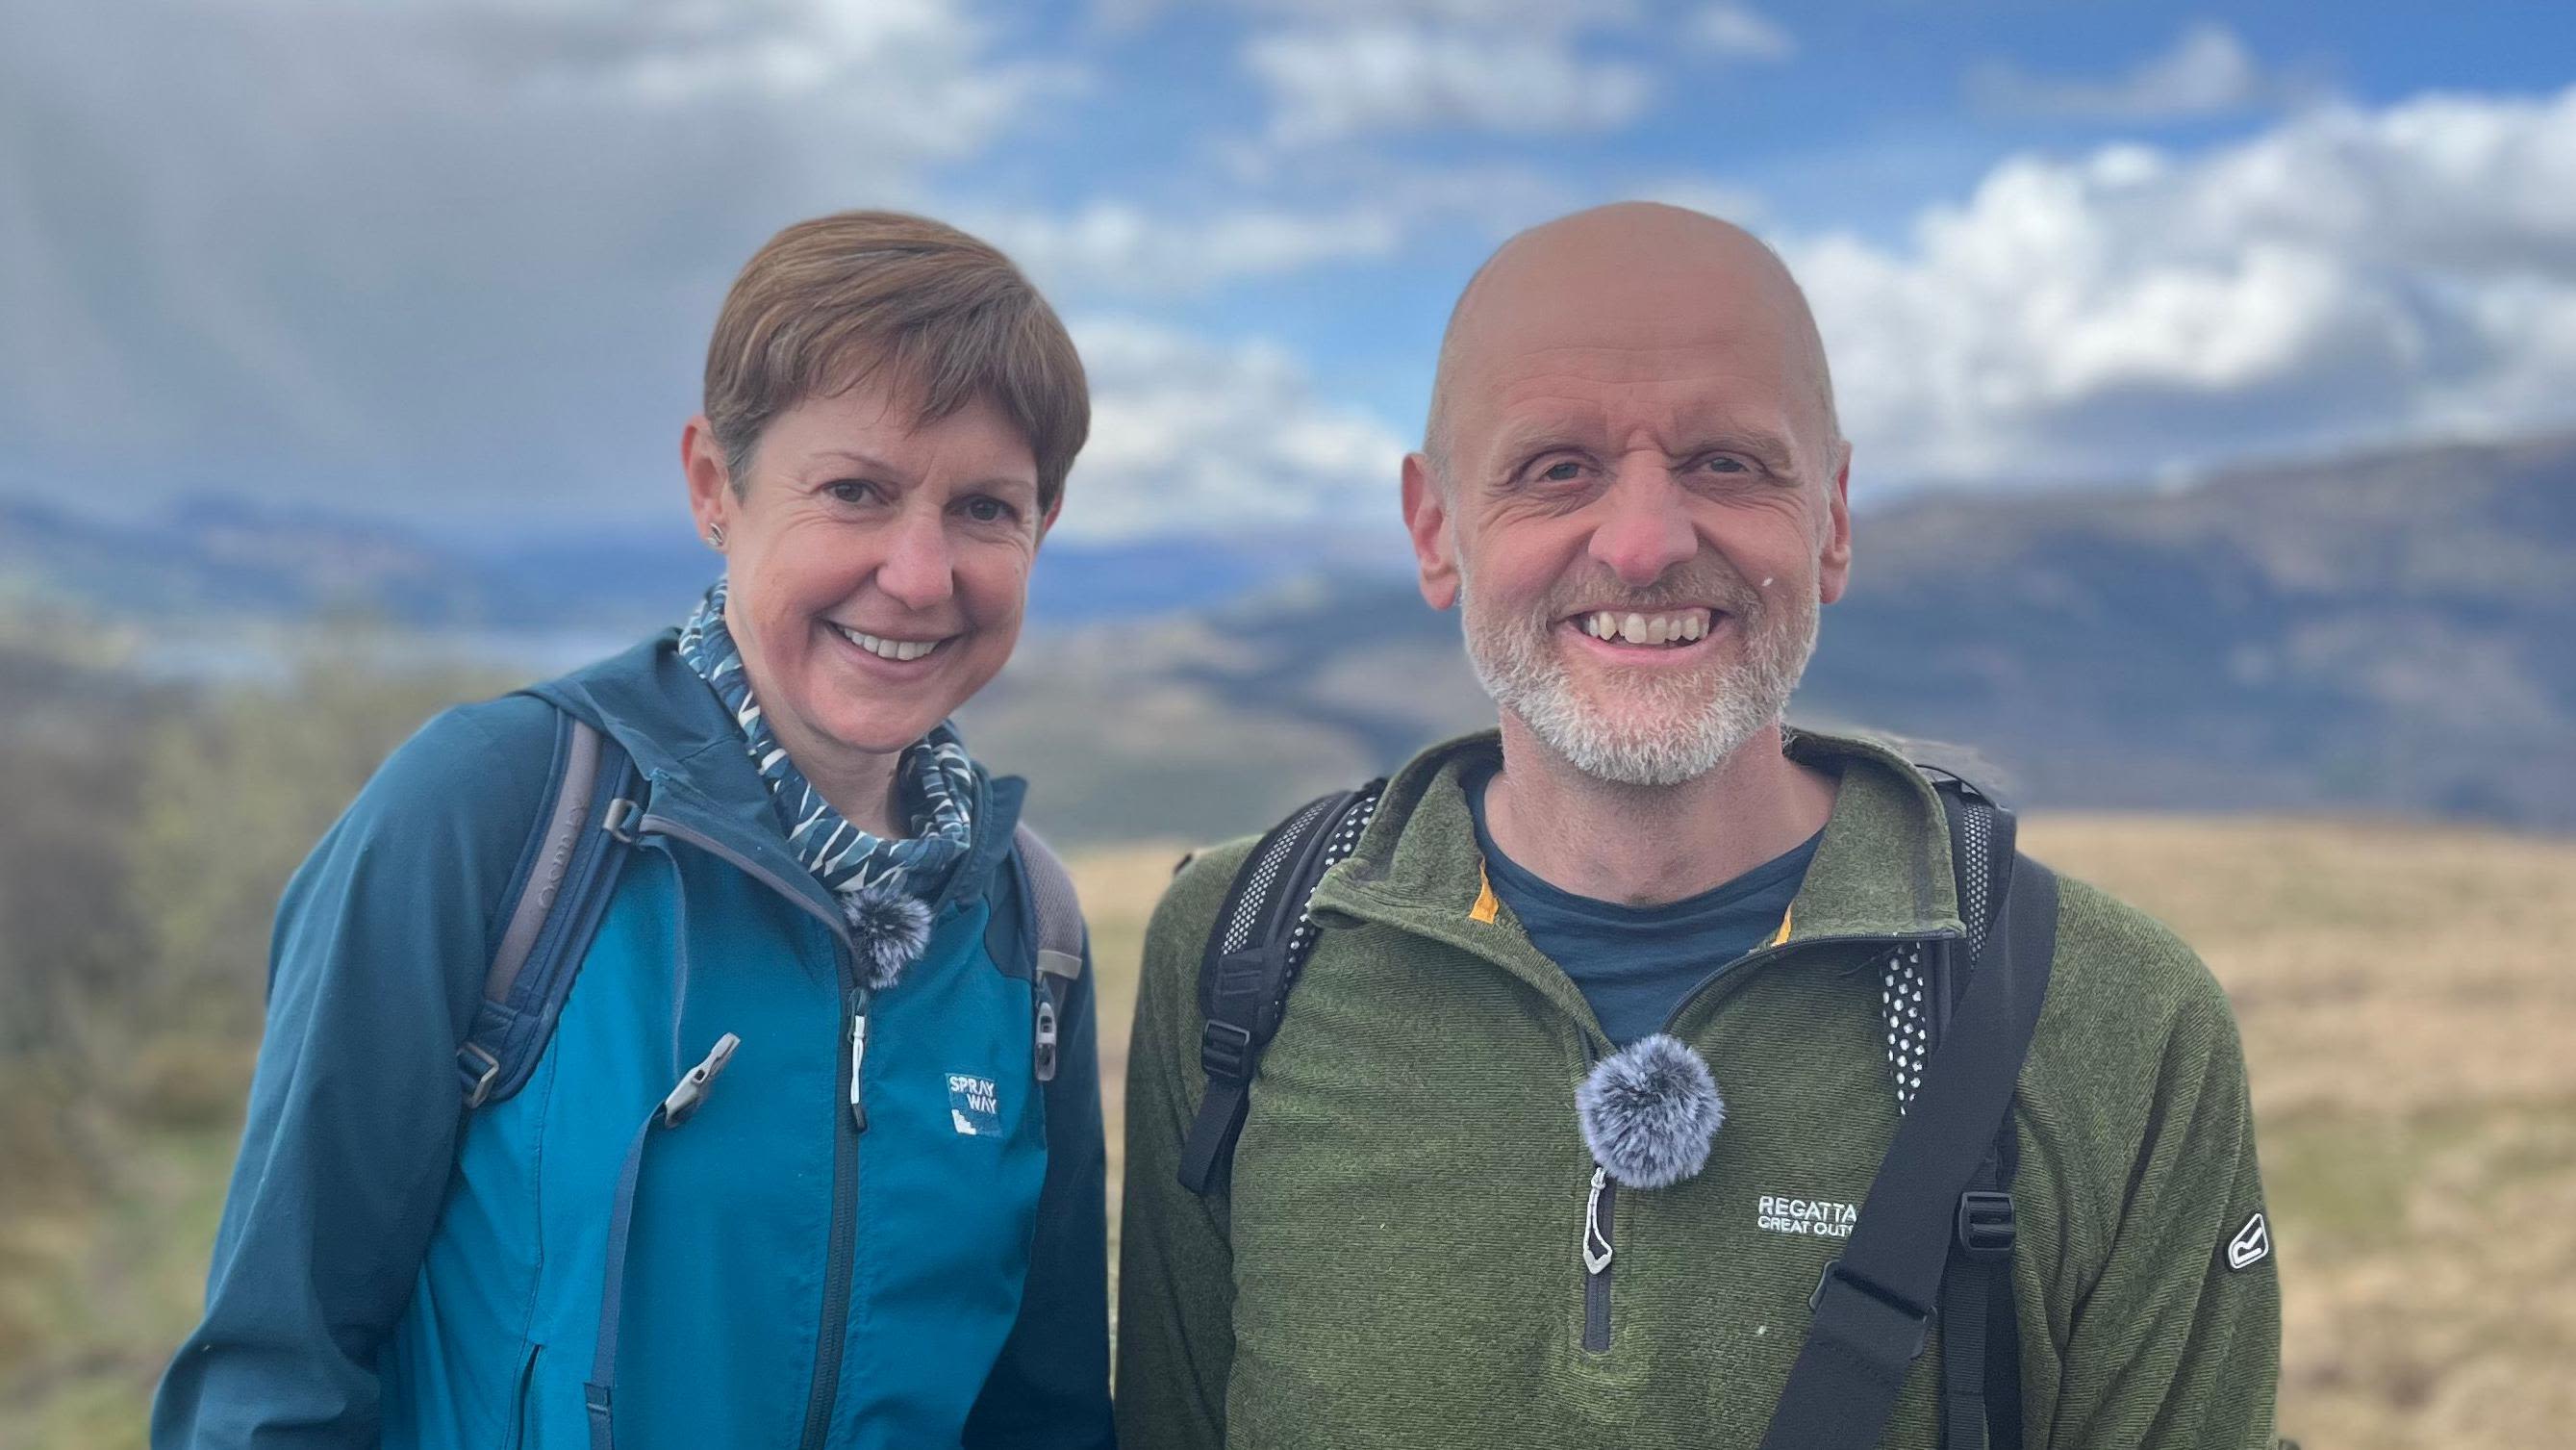 We quit our jobs to share Scotland’s walking routes